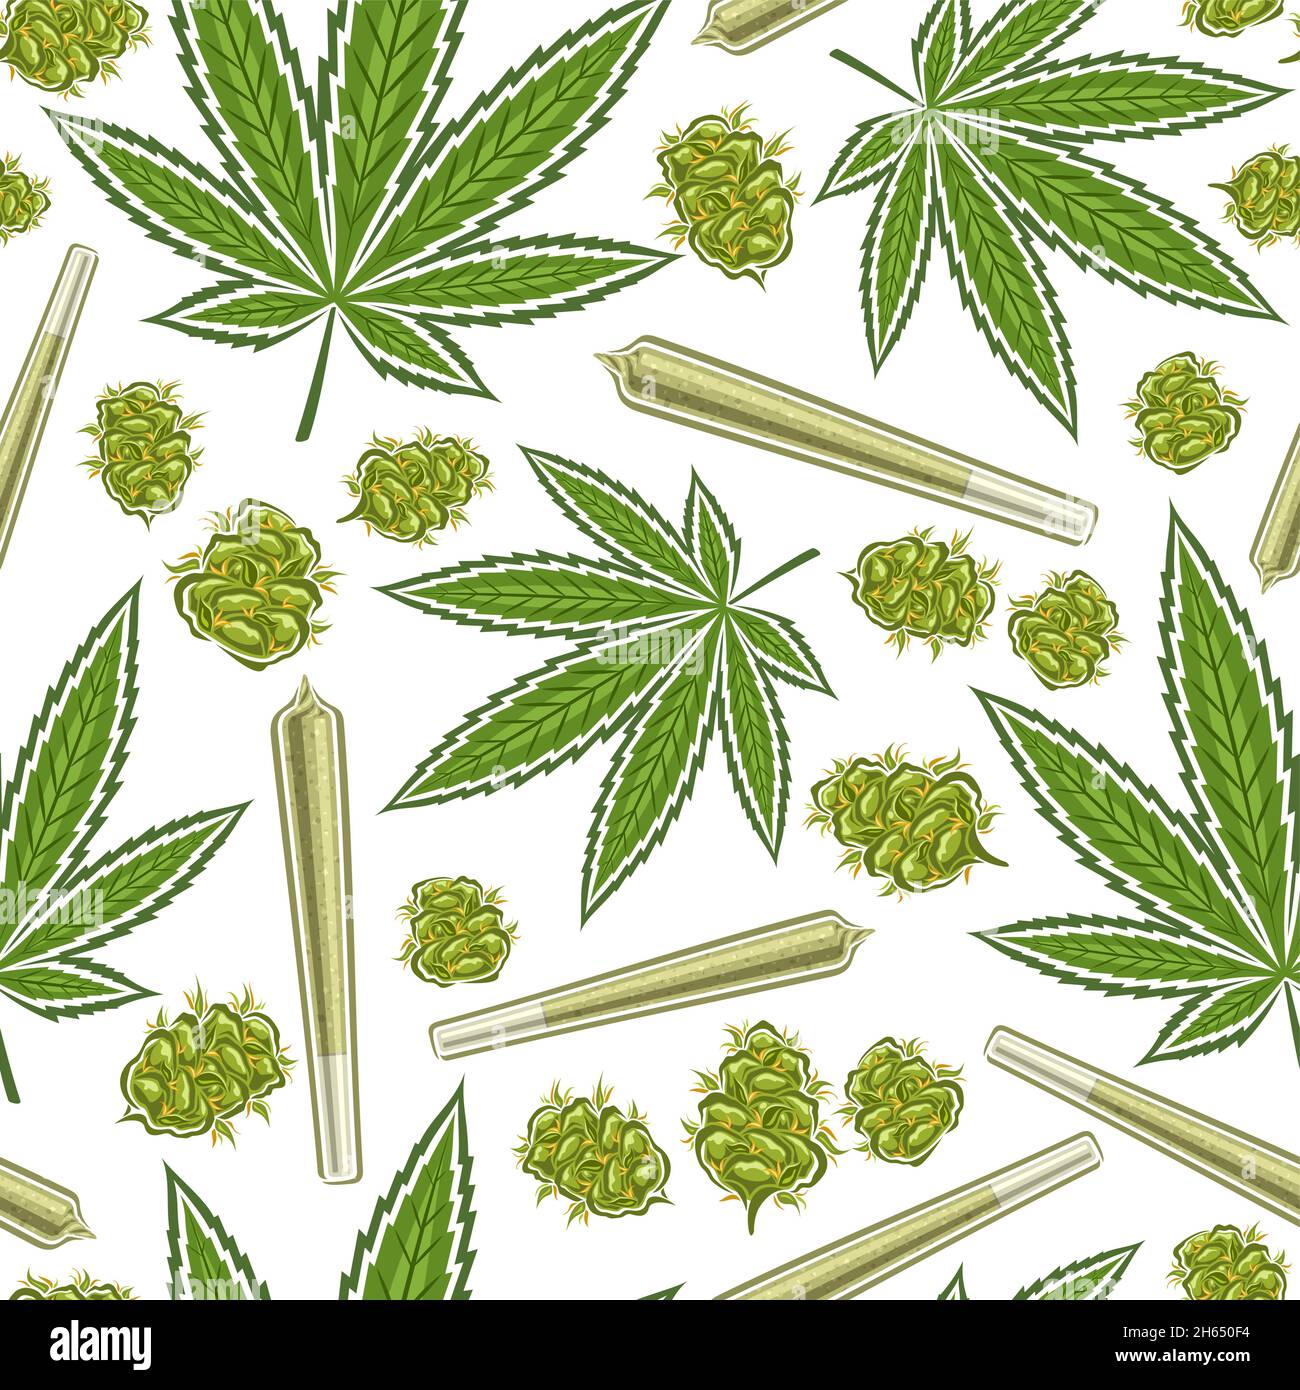 Vector Cannabis Seamless Pattern, square repeating background of cannabis leaves, medicinal marijuana buds, decorative poster with cut out illustratio Stock Vector